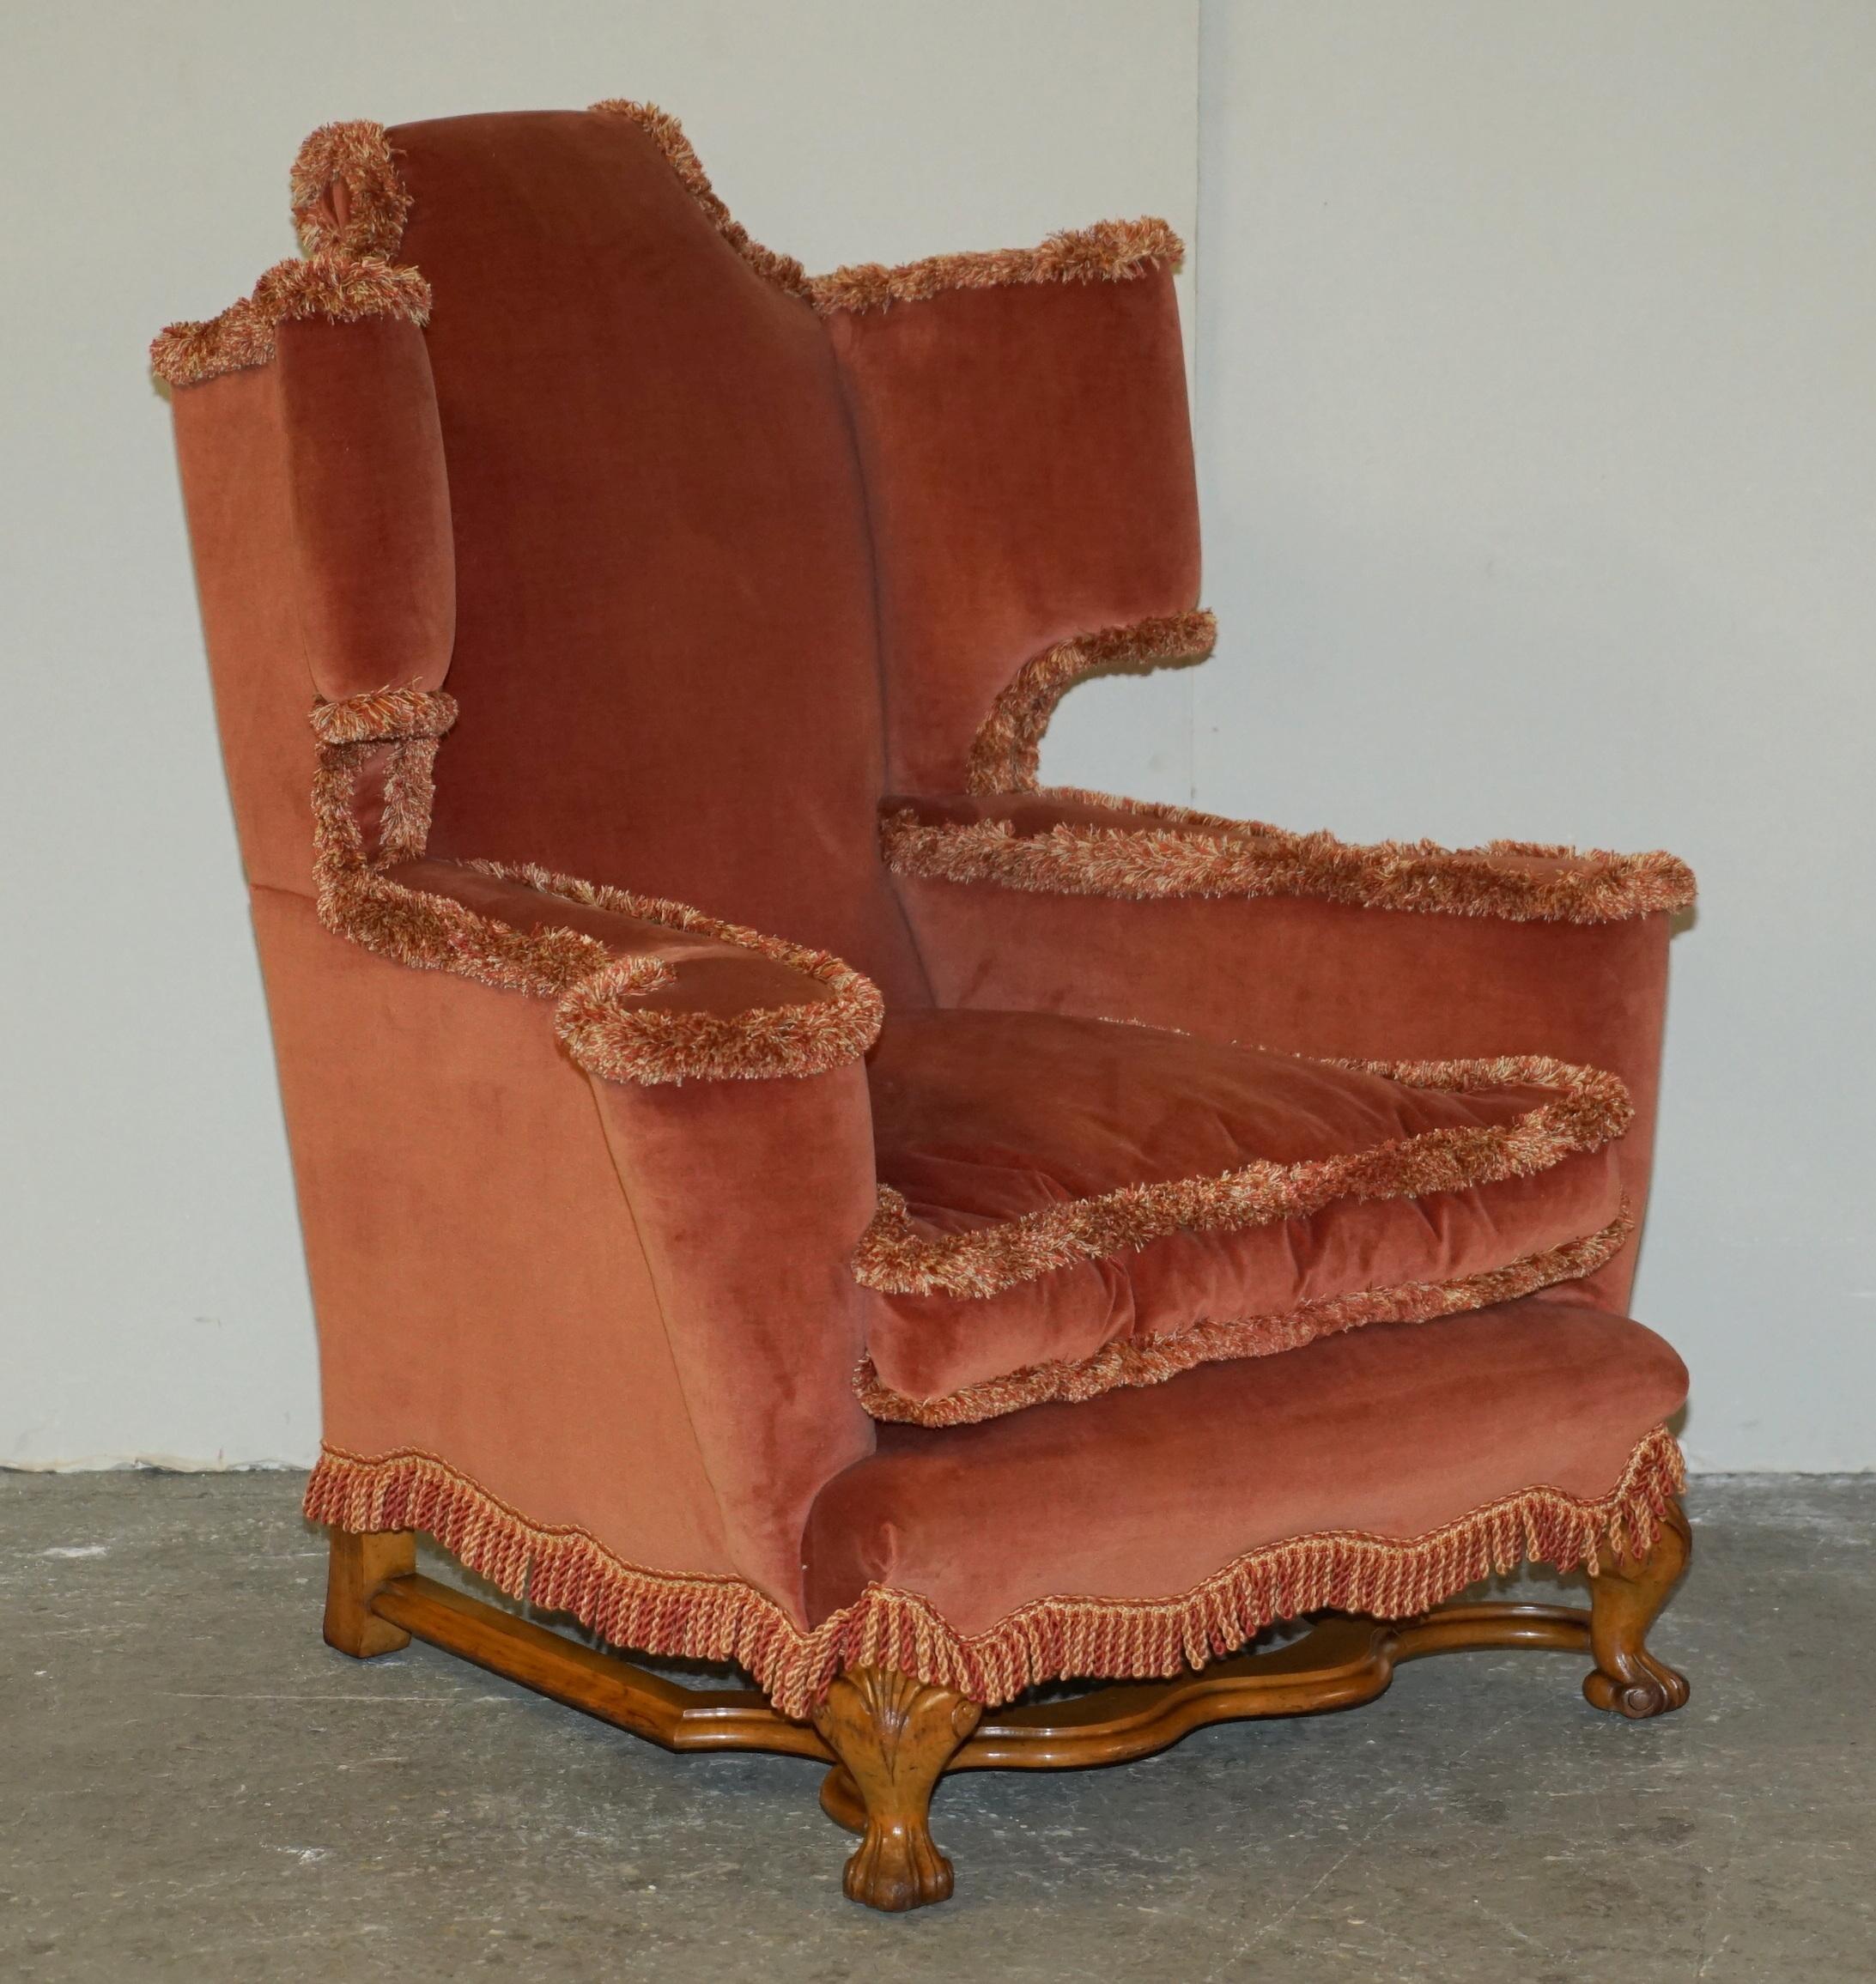 Royal House Antiques

Royal House Antiques is delighted to offer for sale this lovely pair of antique Italian / Carolean throne armchairs with ornately carved bases and William Morris style flat top arms

Please note the delivery fee listed is just